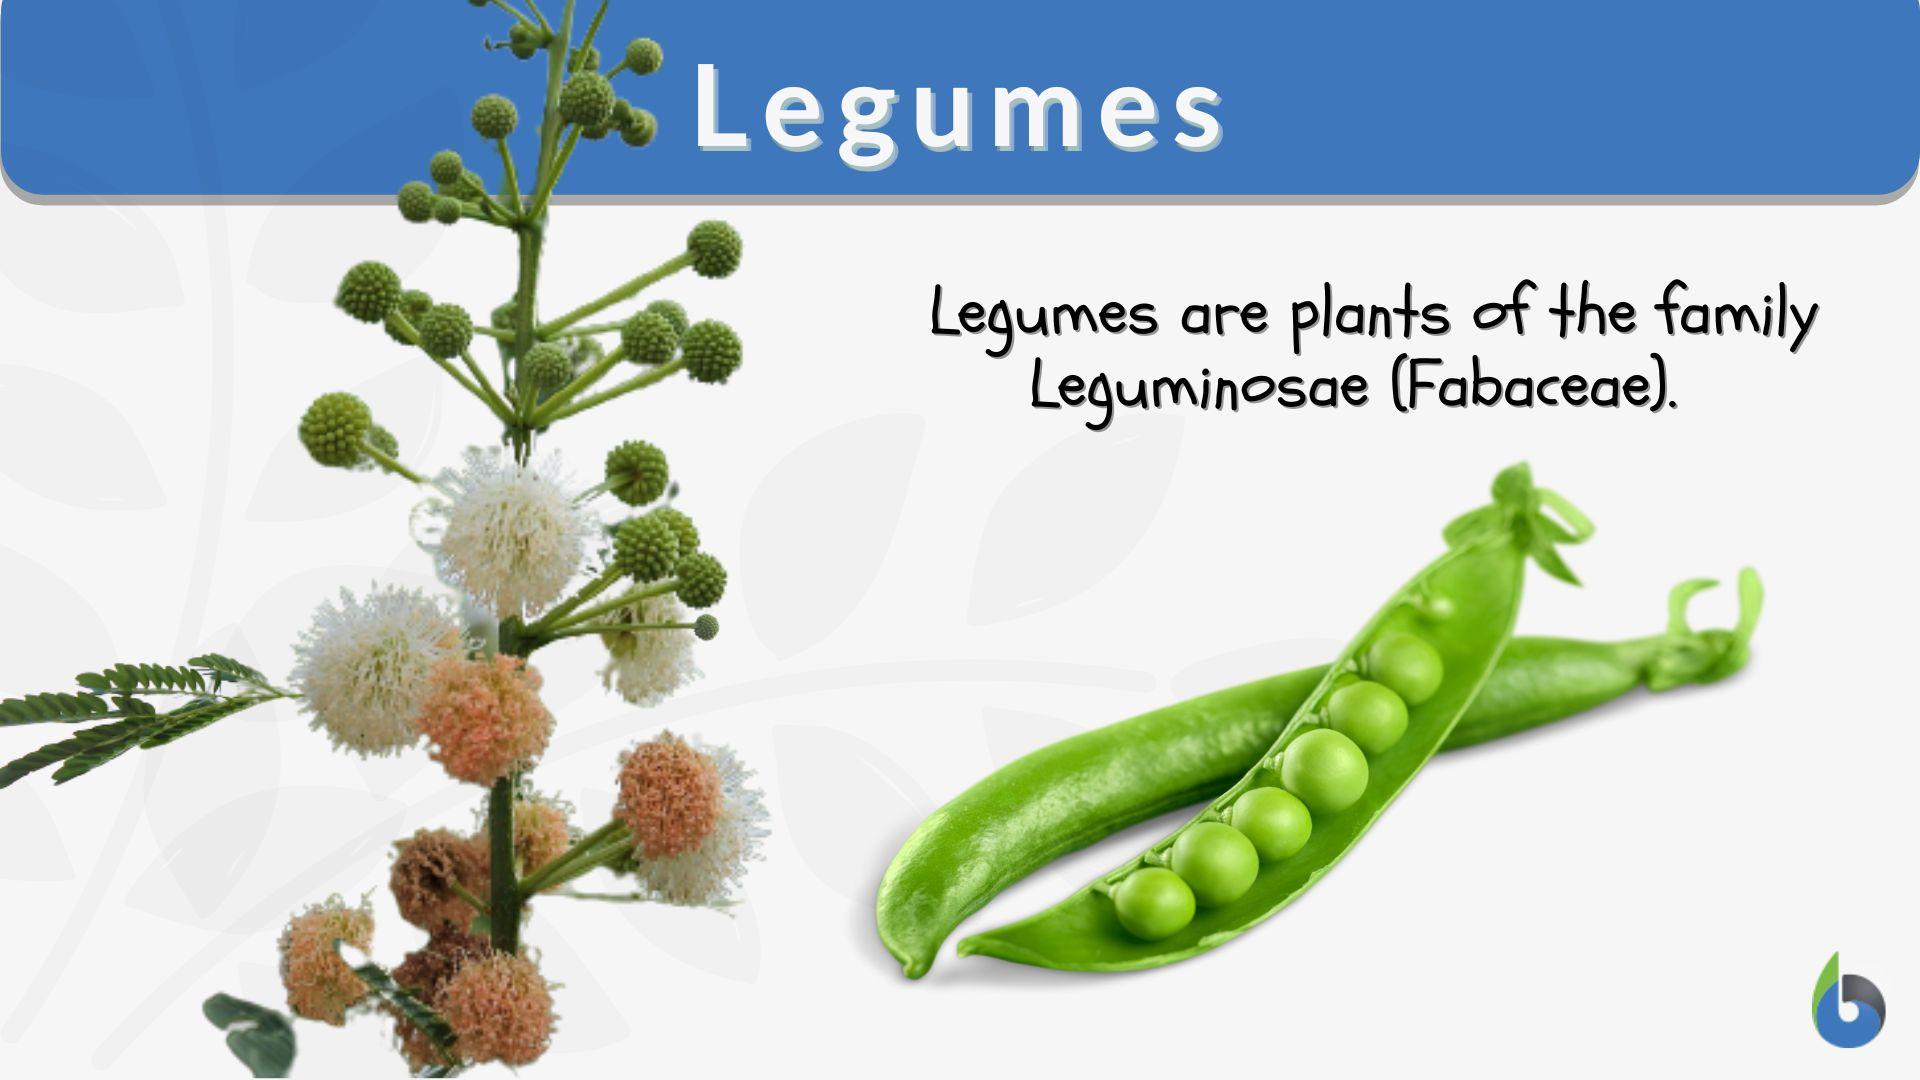 Legumes - Definition and Examples - Biology Online Dictionary